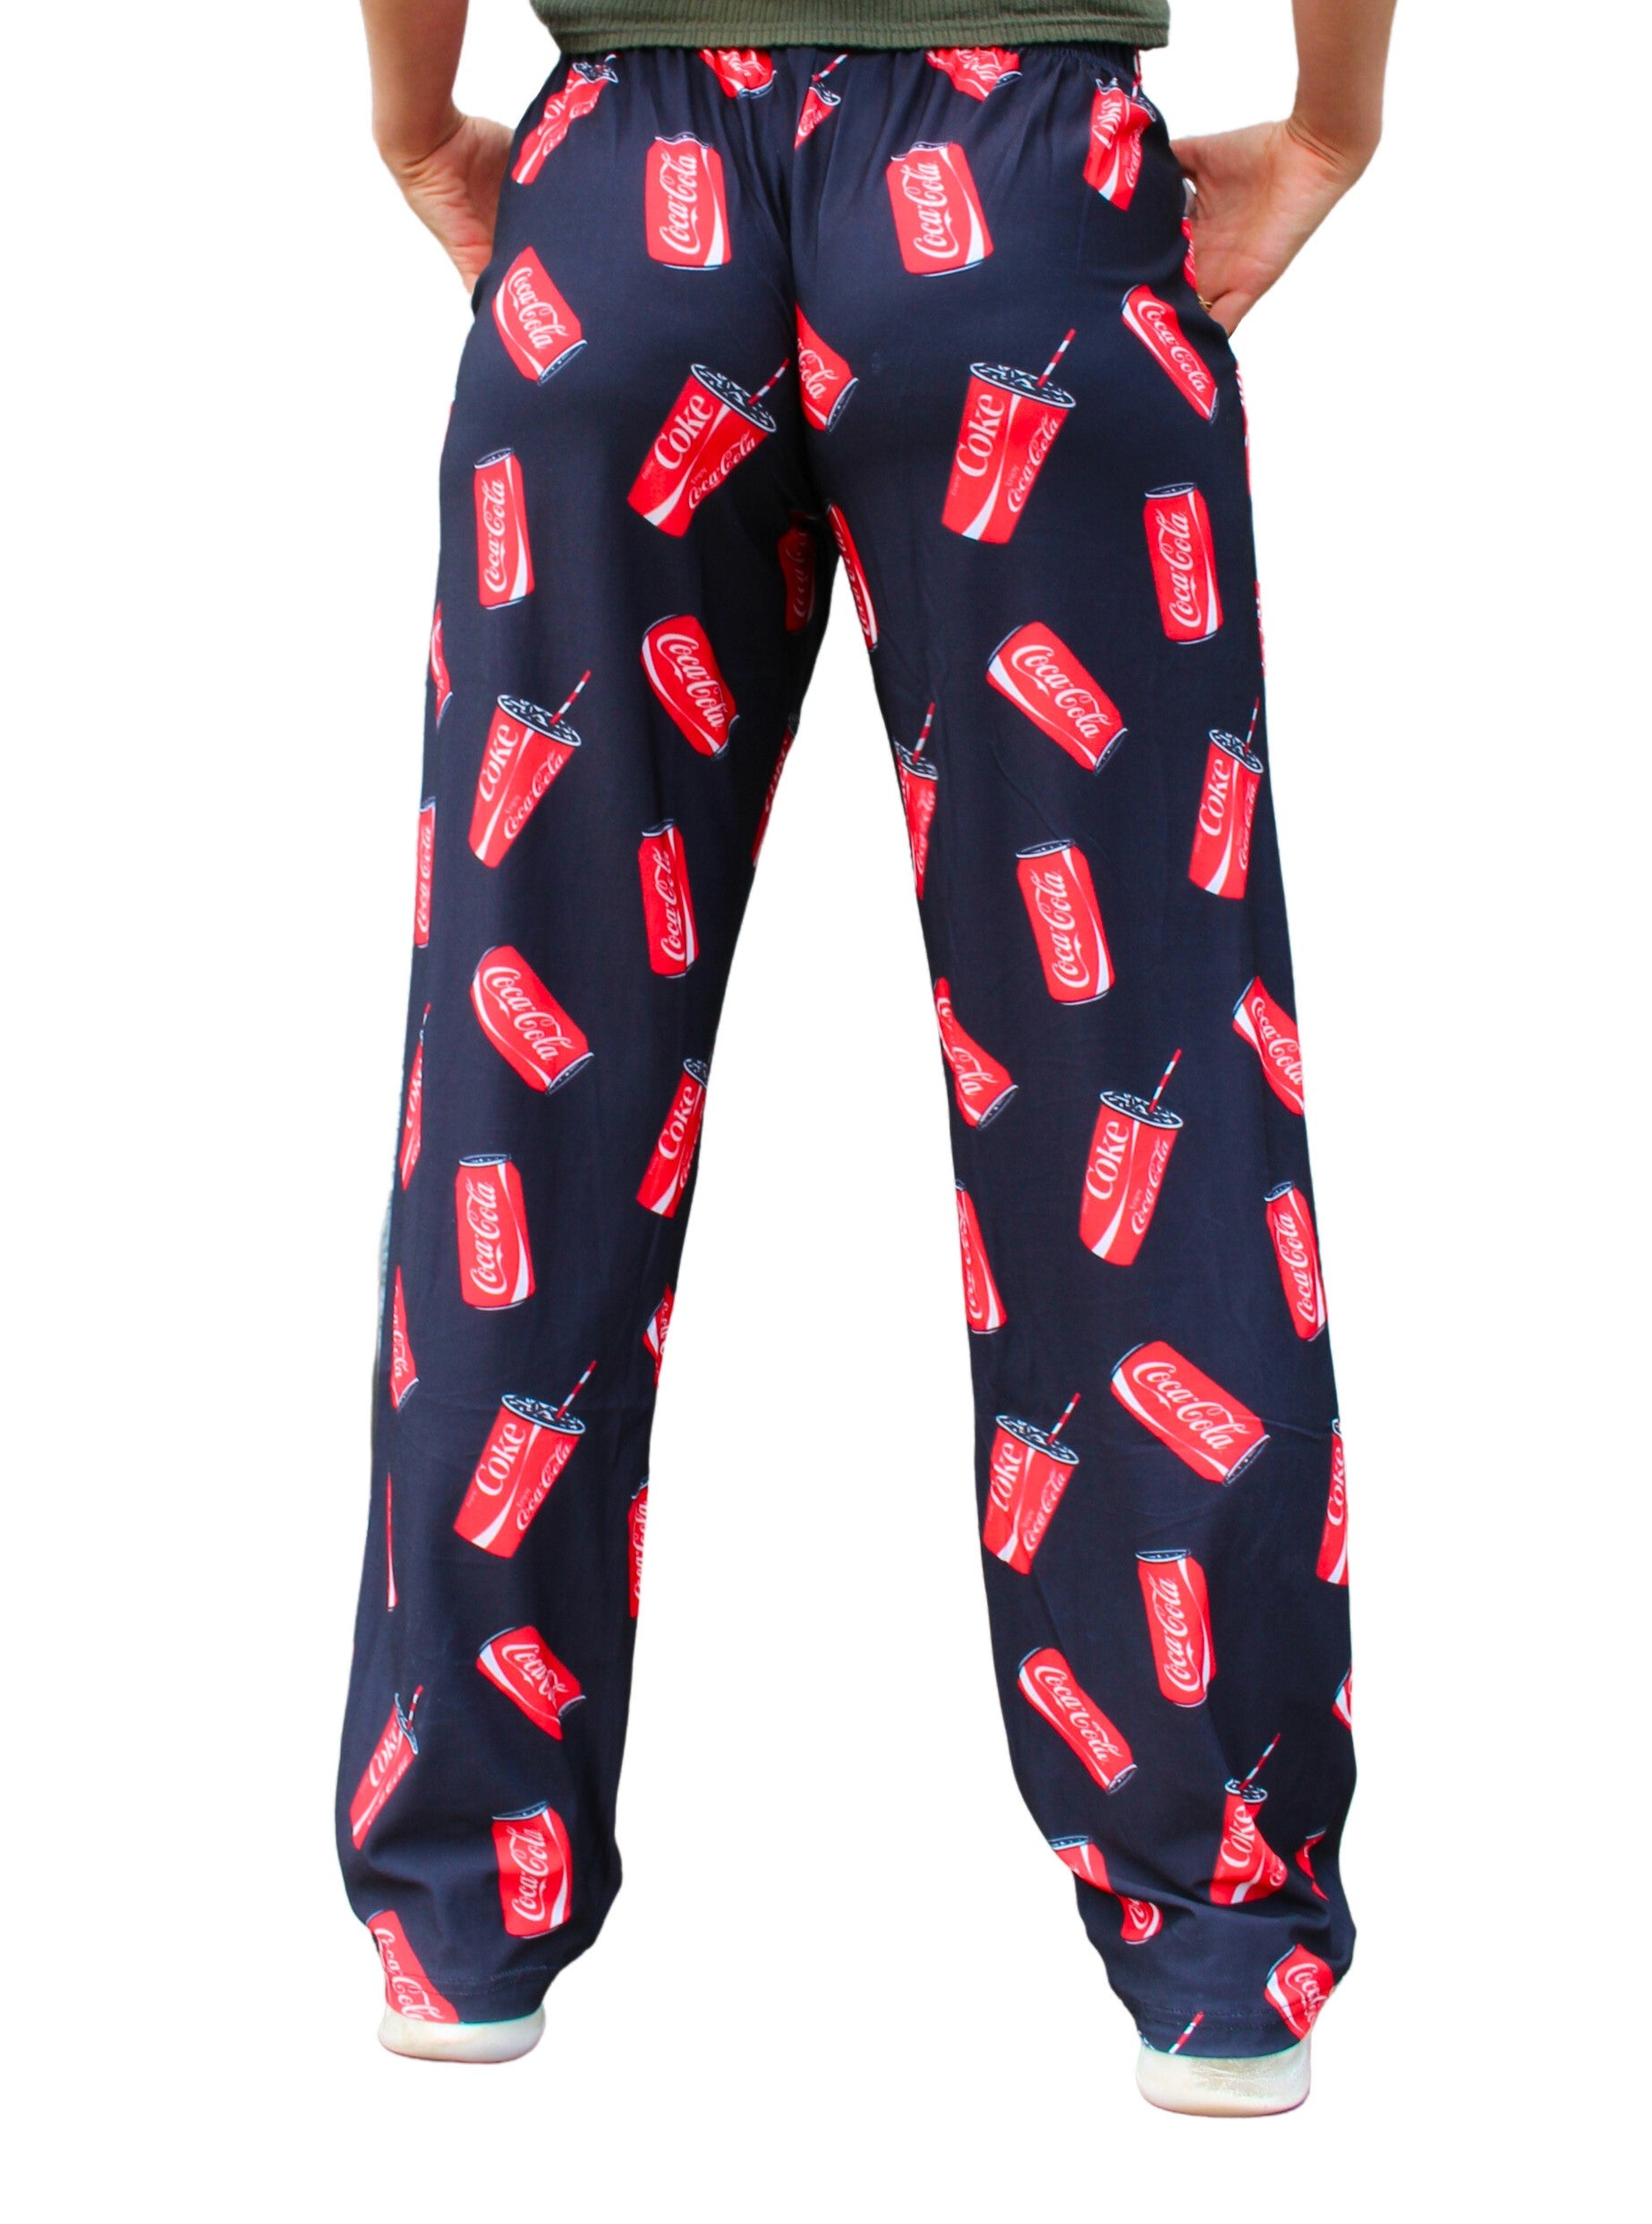 Coca-Cola Can & Cup Pattern Pajama Lounge Pants on model back view